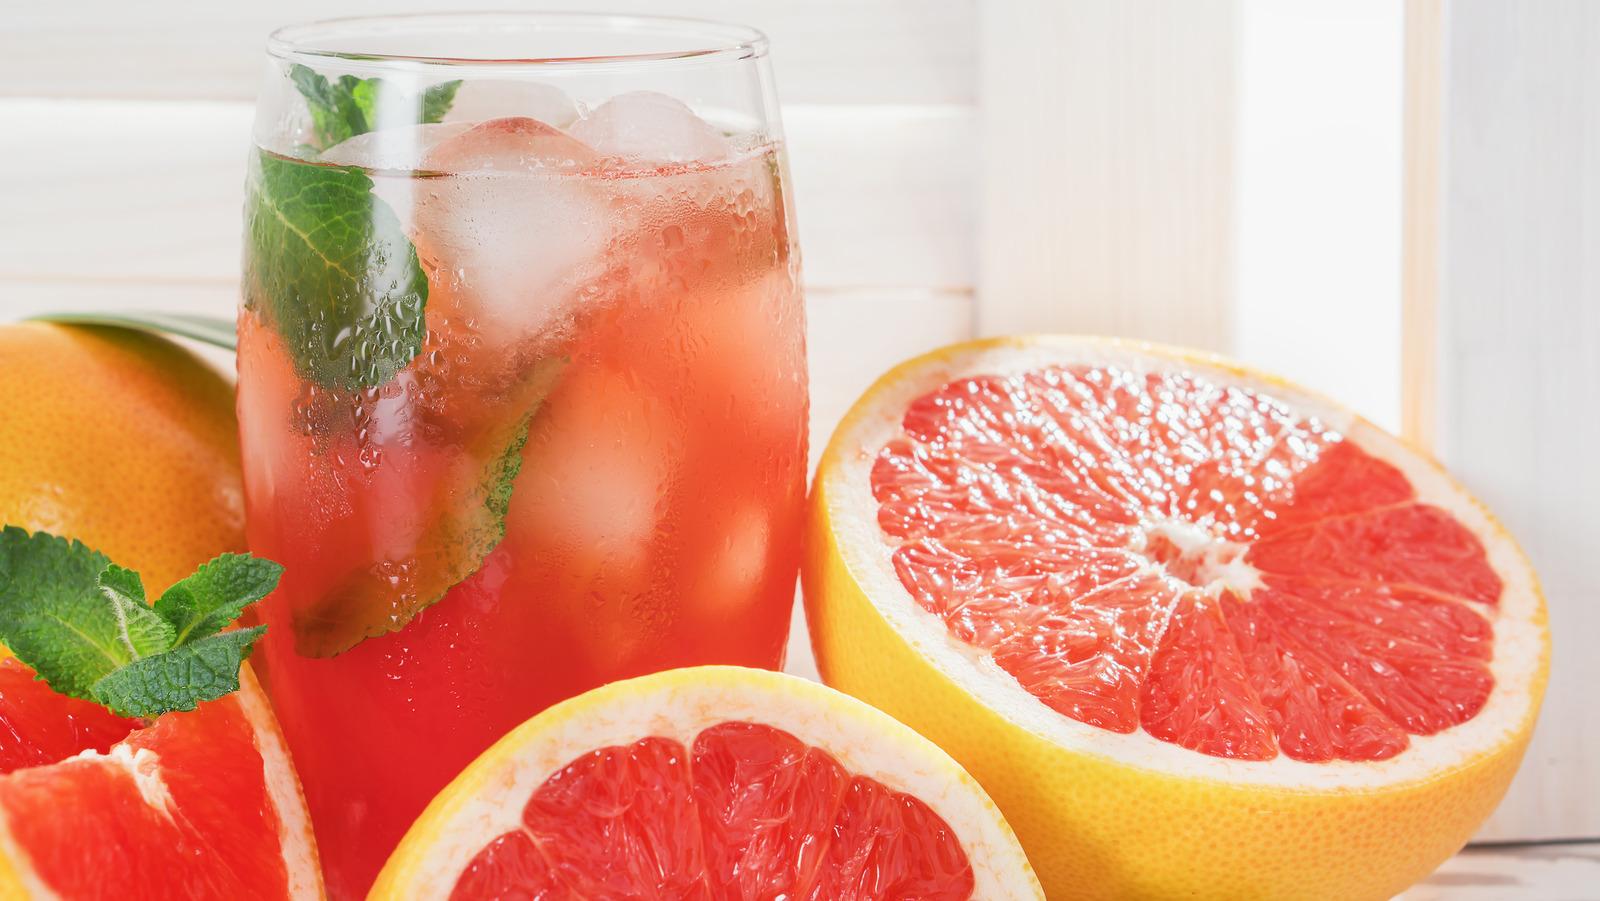 When You Drink Grapefruit Juice Every Day, This Is What Happens